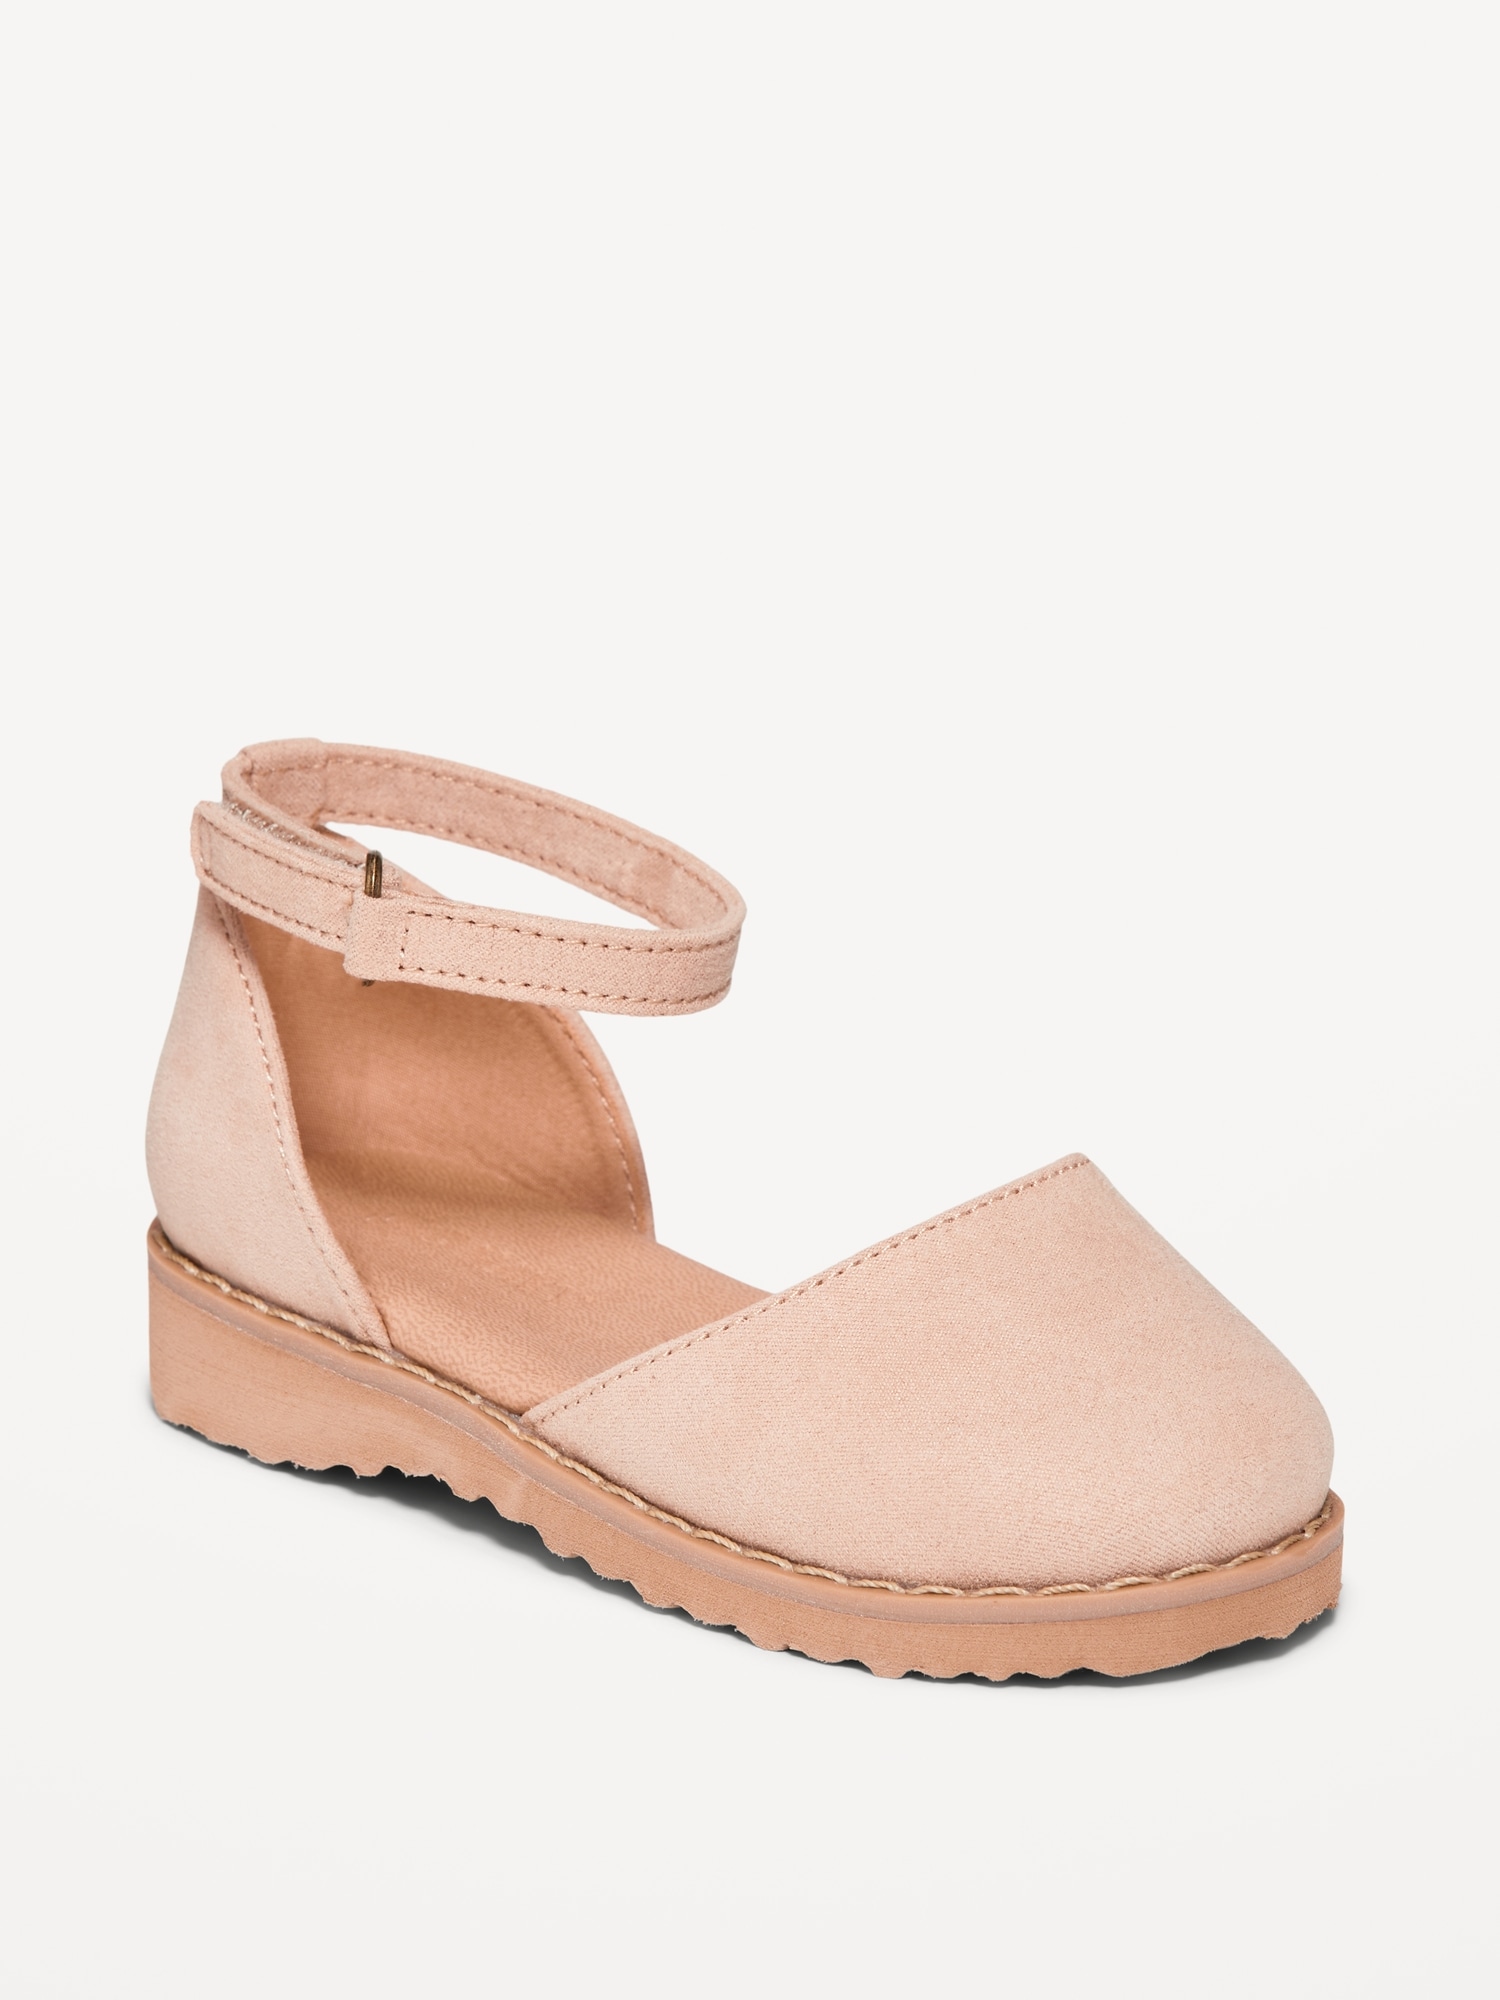 Chunky Buckle-Strap Ballet Shoes for Toddler Girls